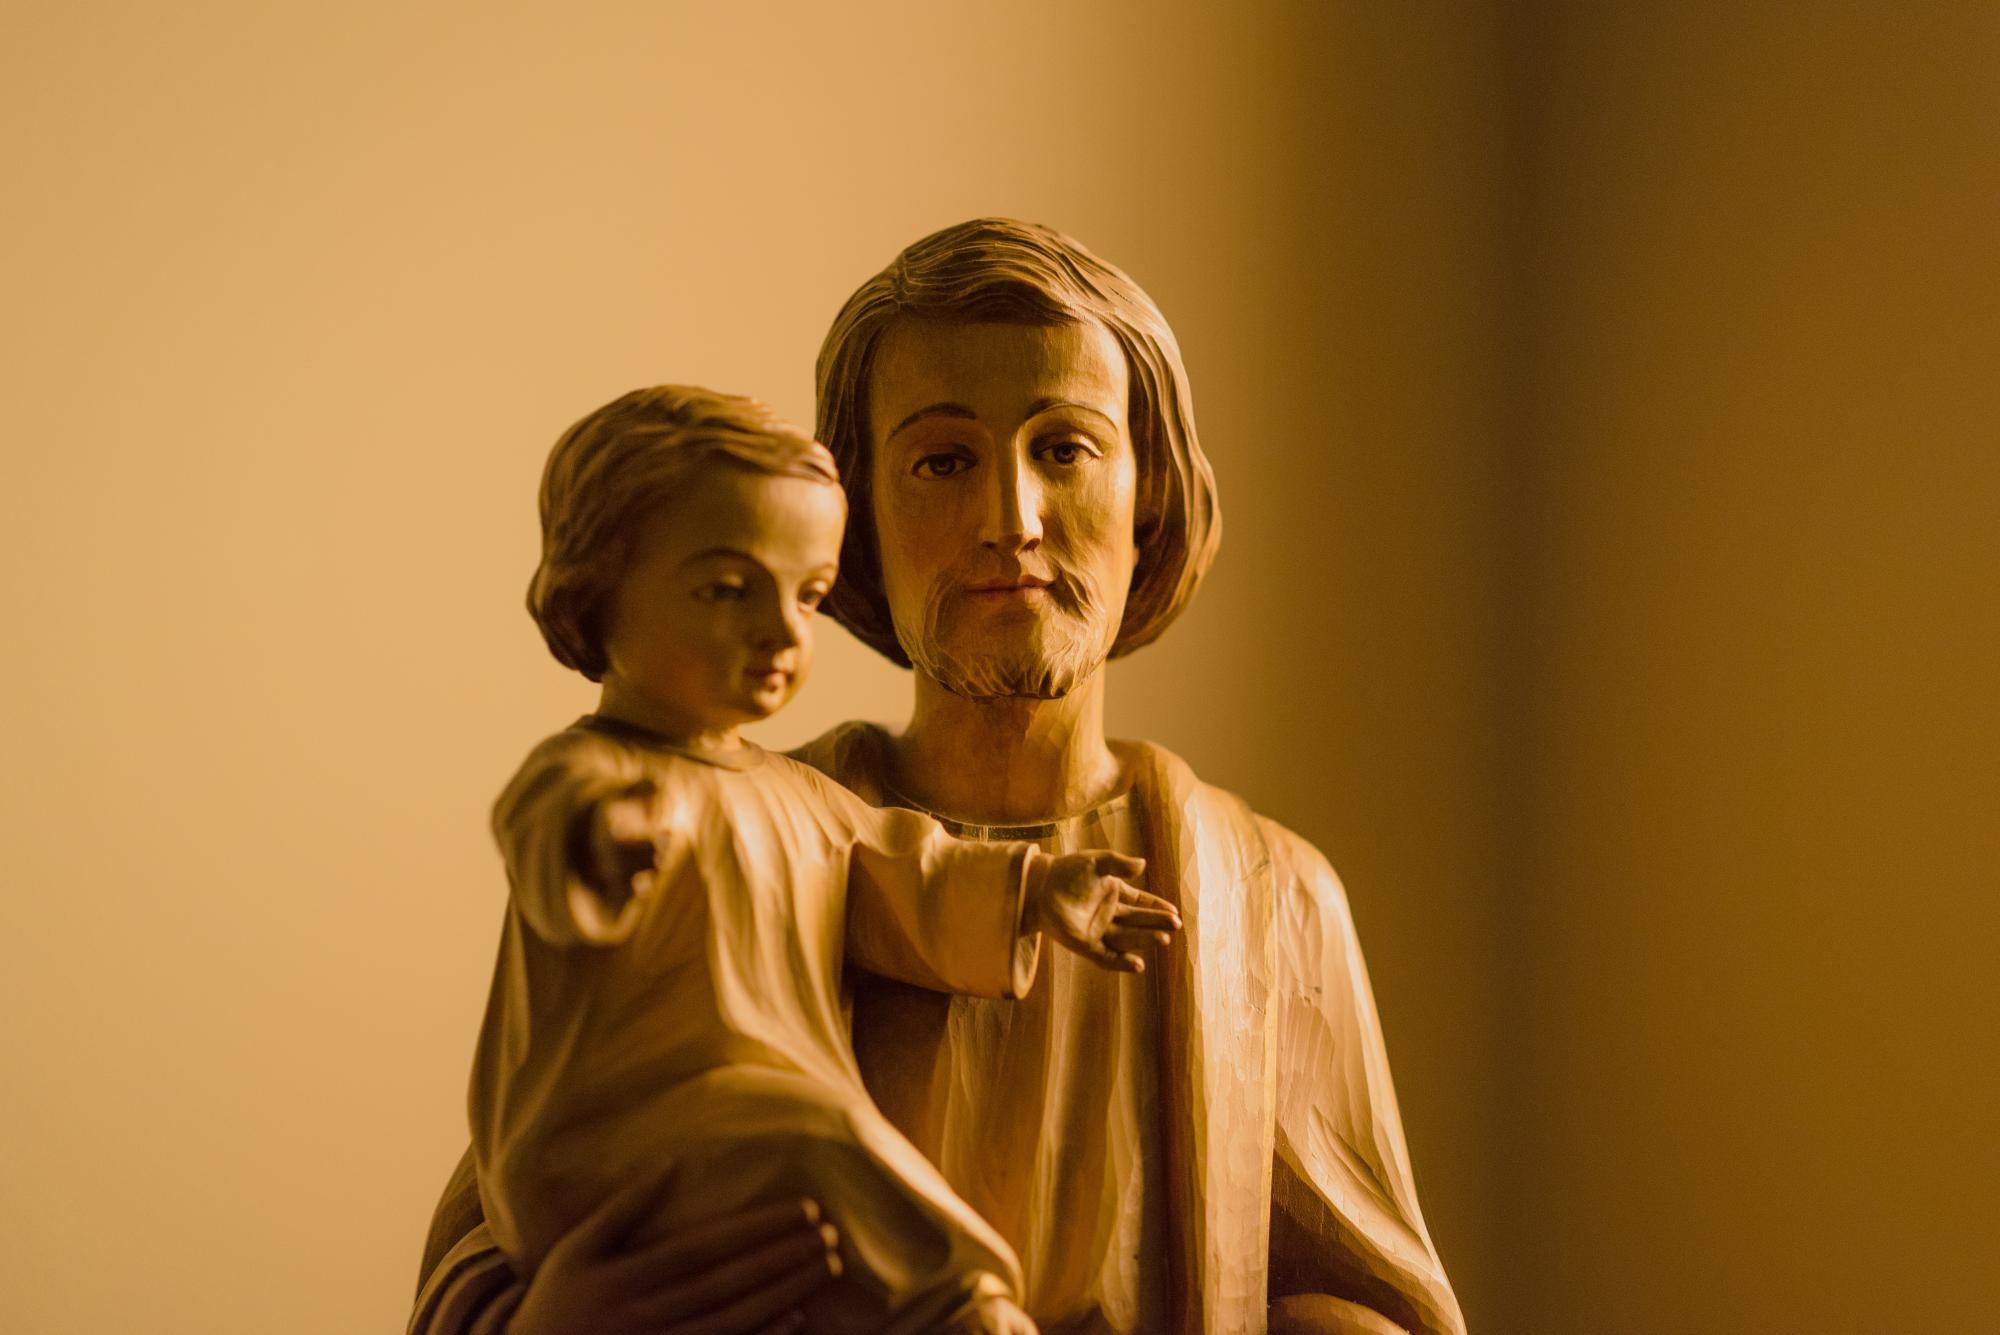 Statue of St. Joseph, appearing to look at the camera, as he holds the infant Jesus.